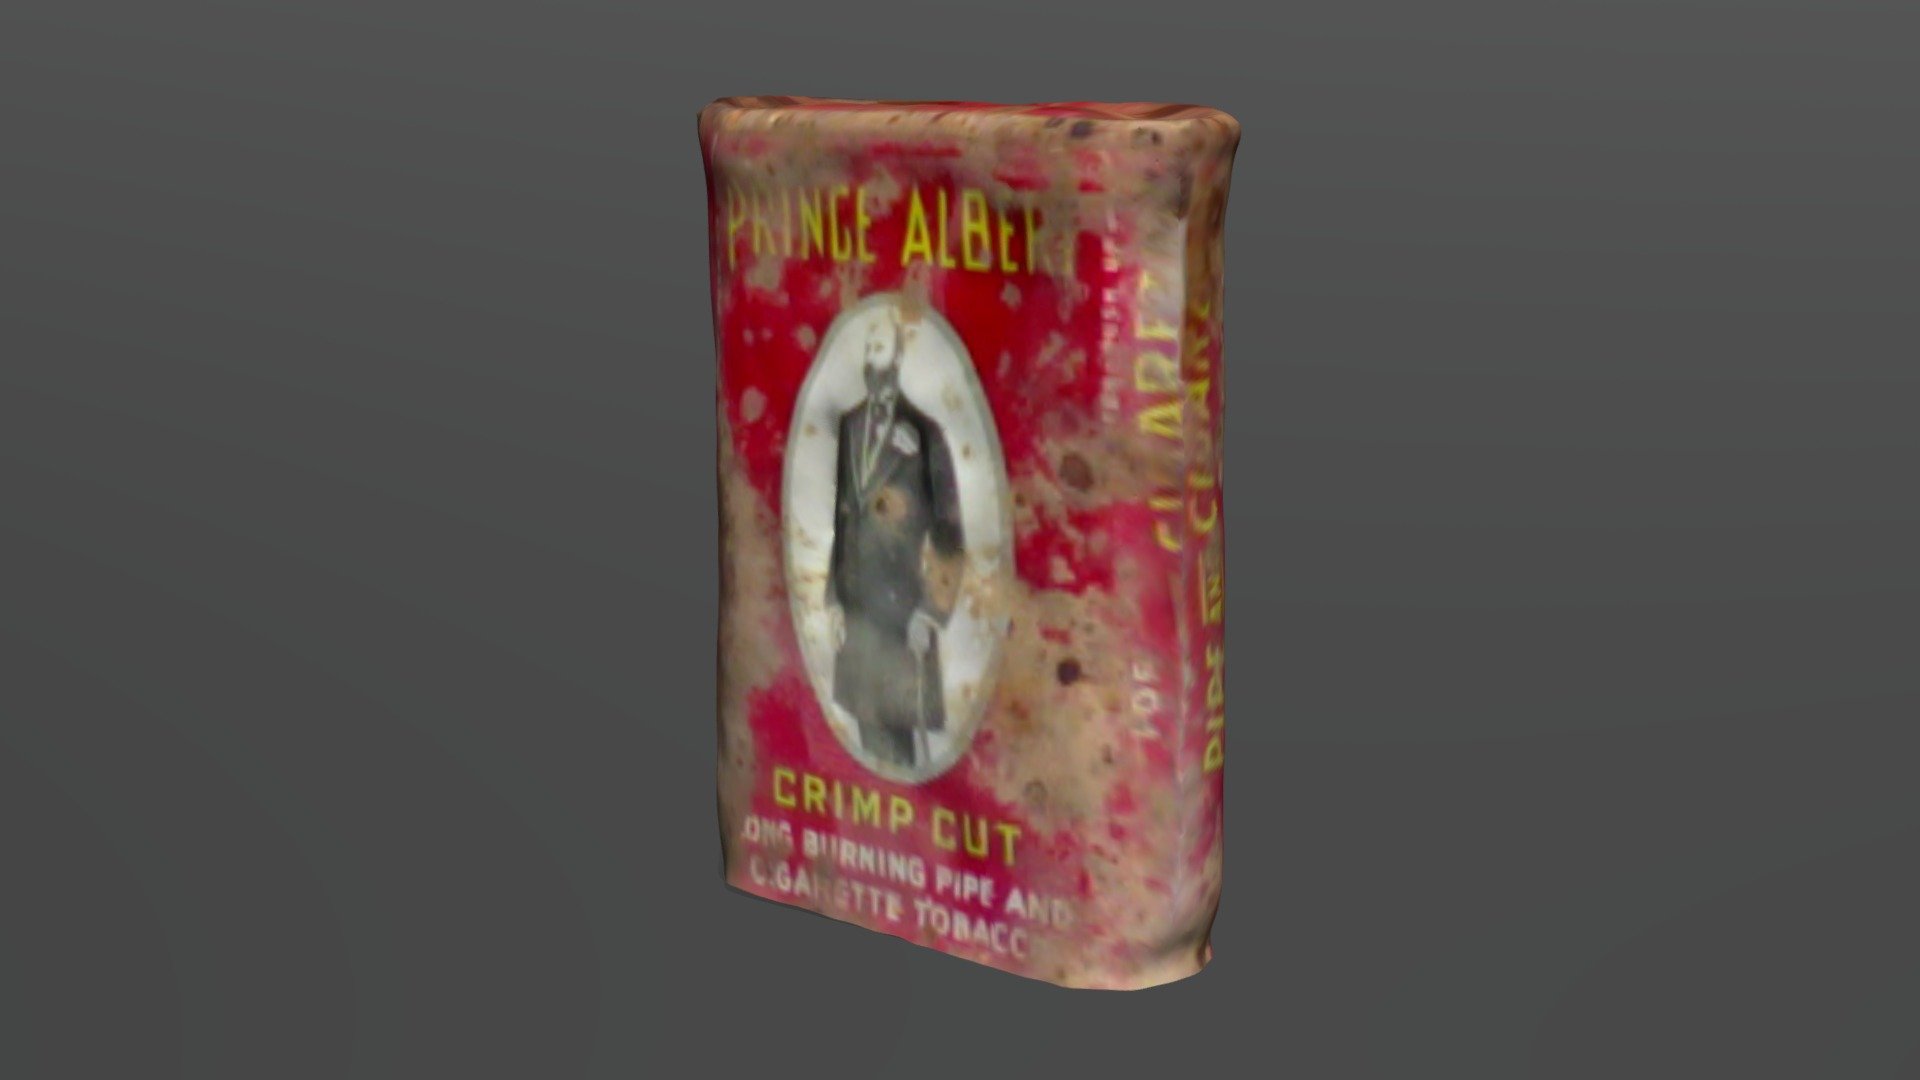 Albert in a can